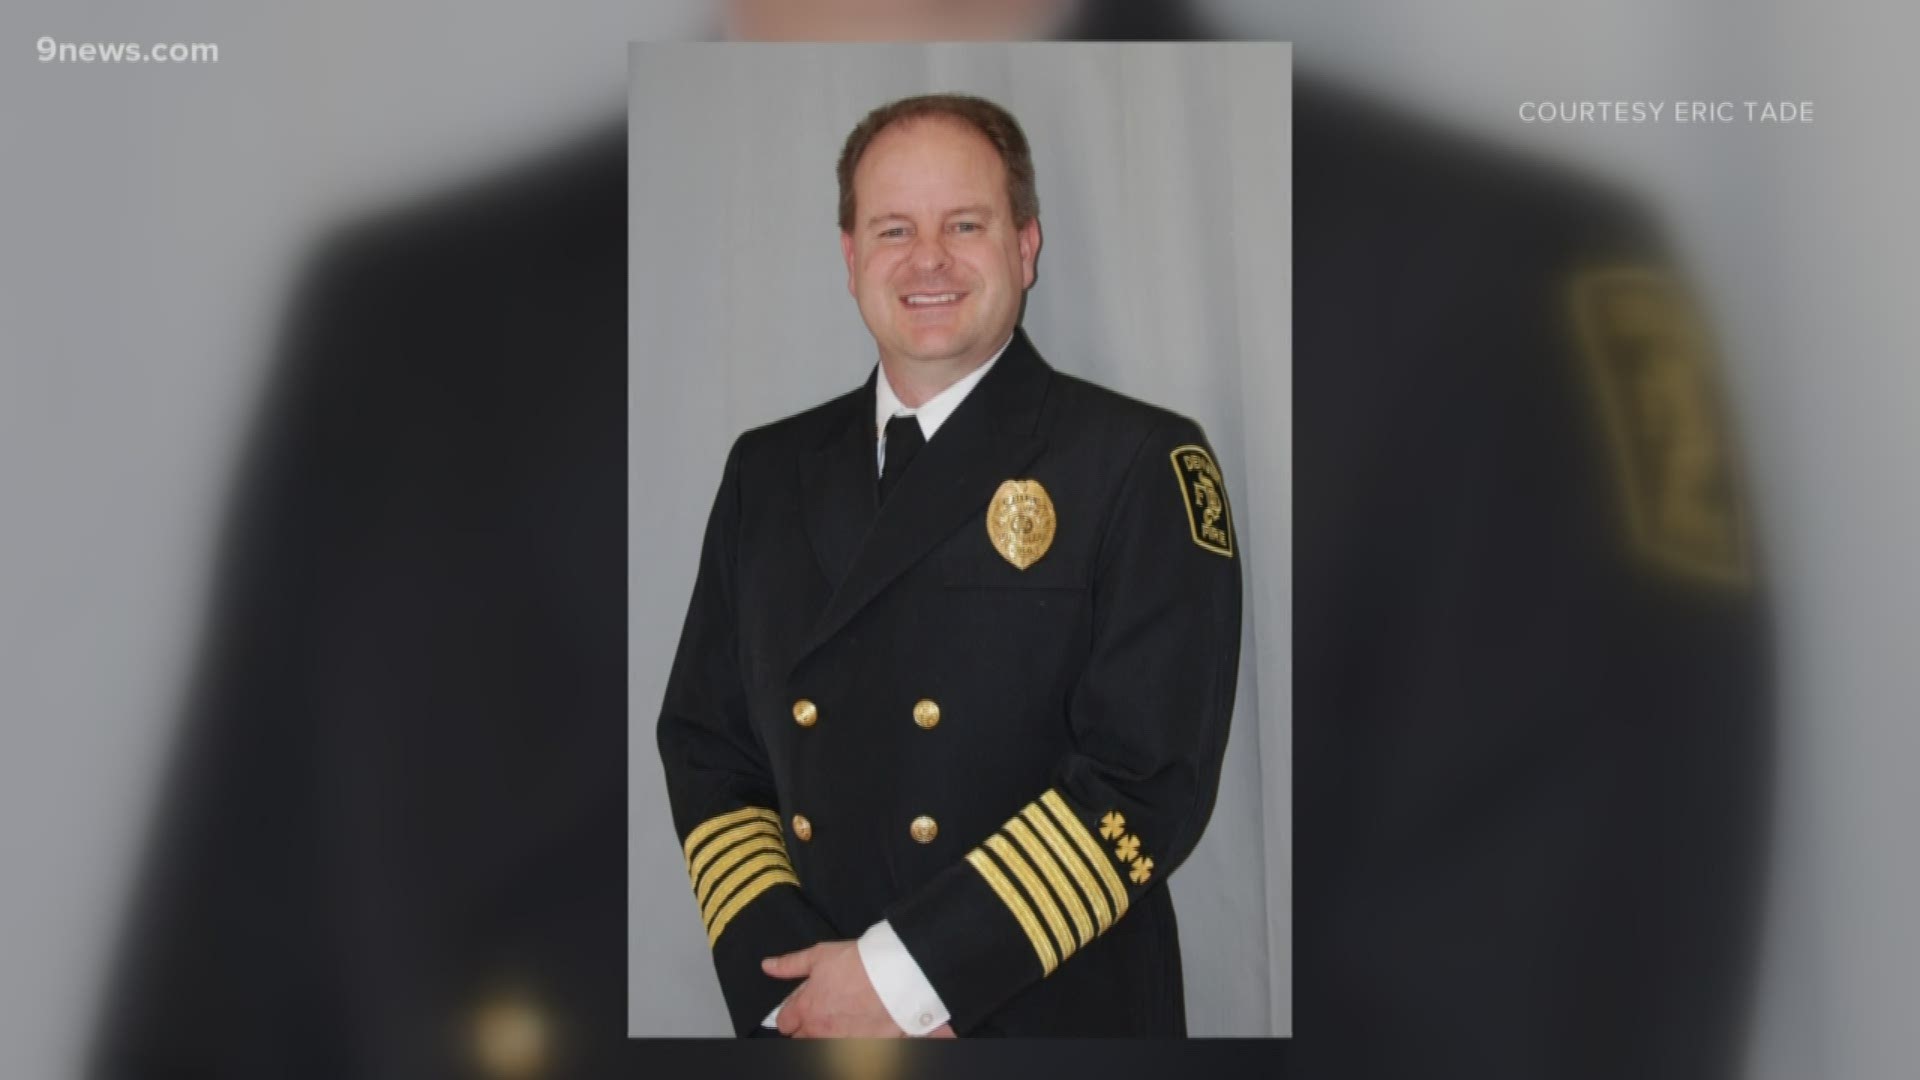 Eric Tade's last day as chief will be March 16, however, he will stay with the department as an assistant chief.